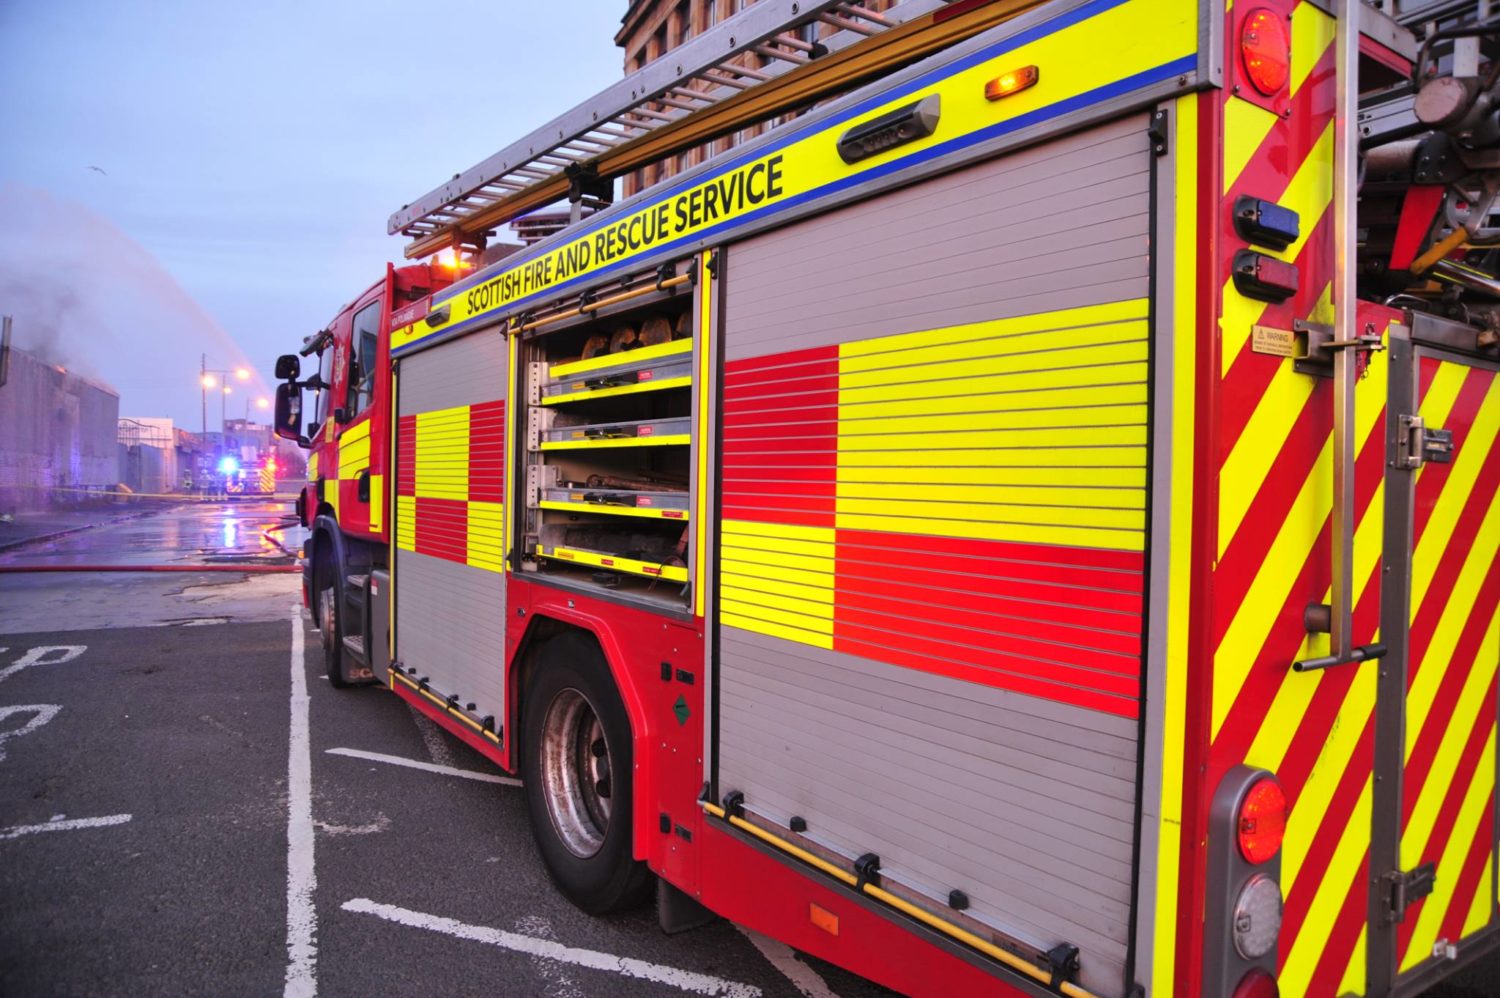 Strike action called off as Scottish firefighters accept improved pay deal